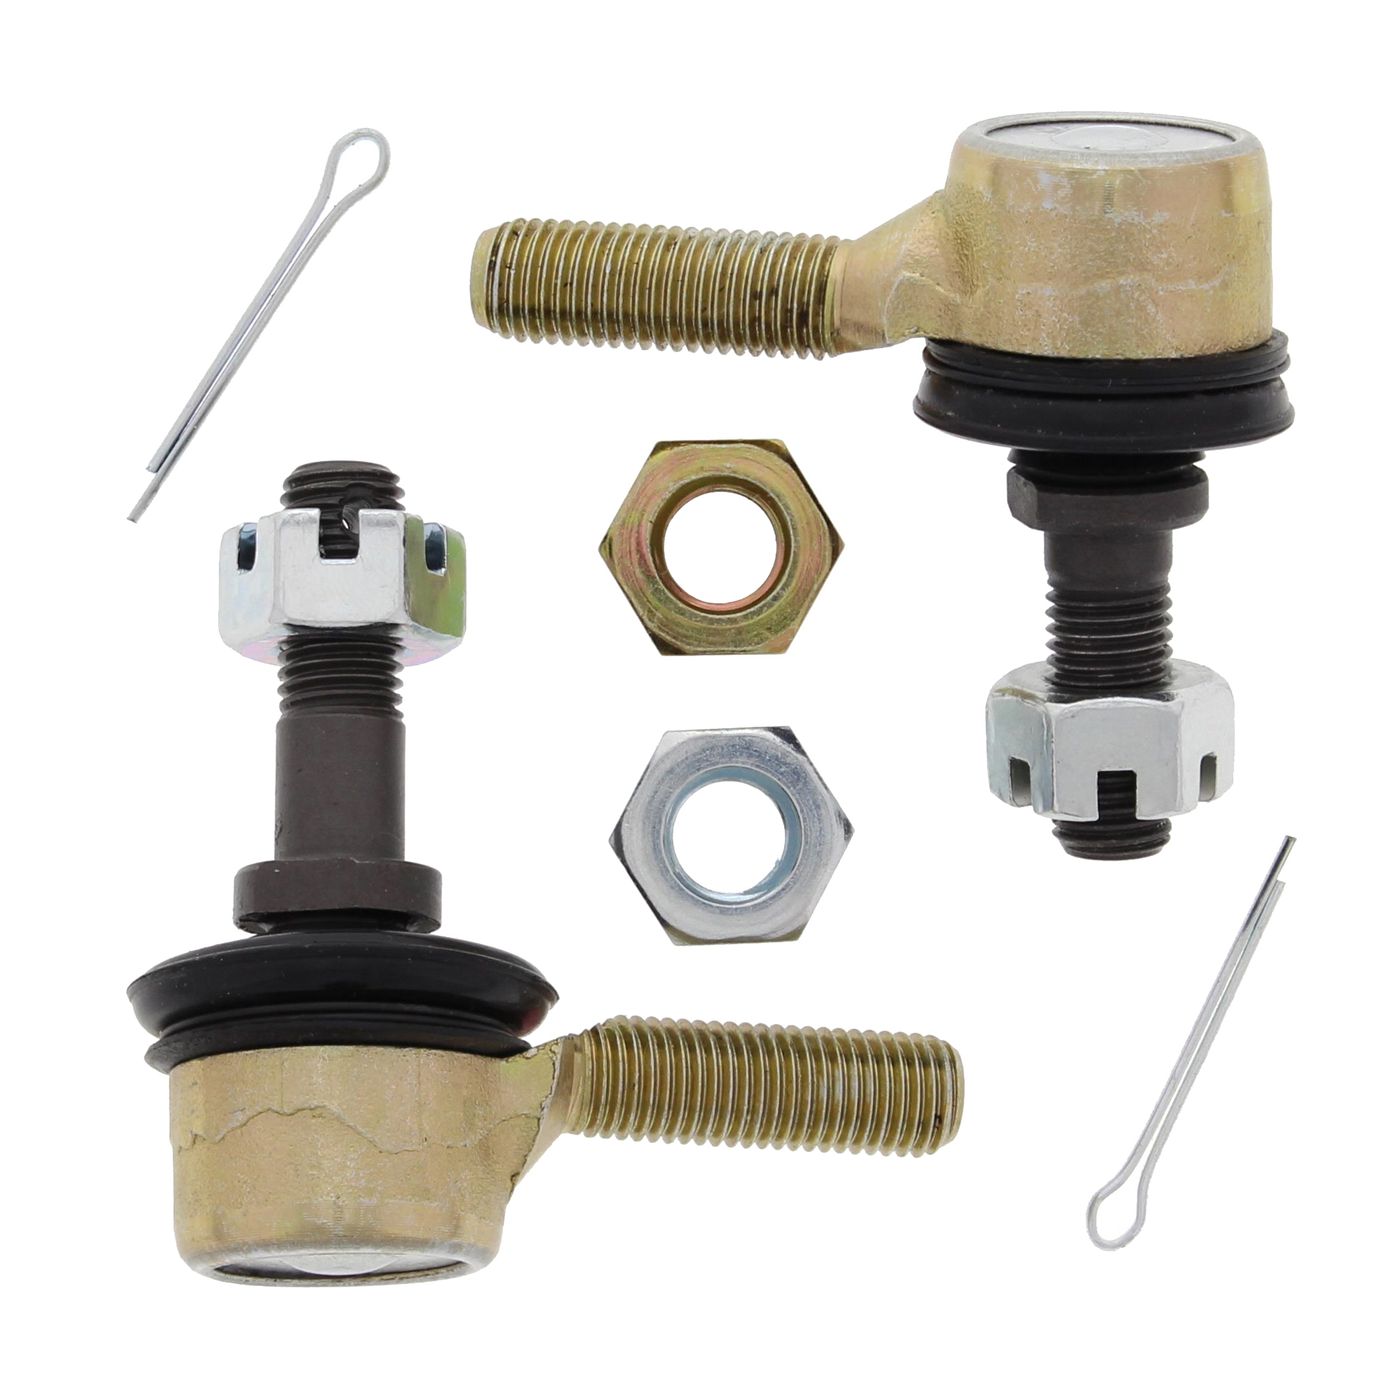 Wrp Tie Rod Ends - WRP511051 image